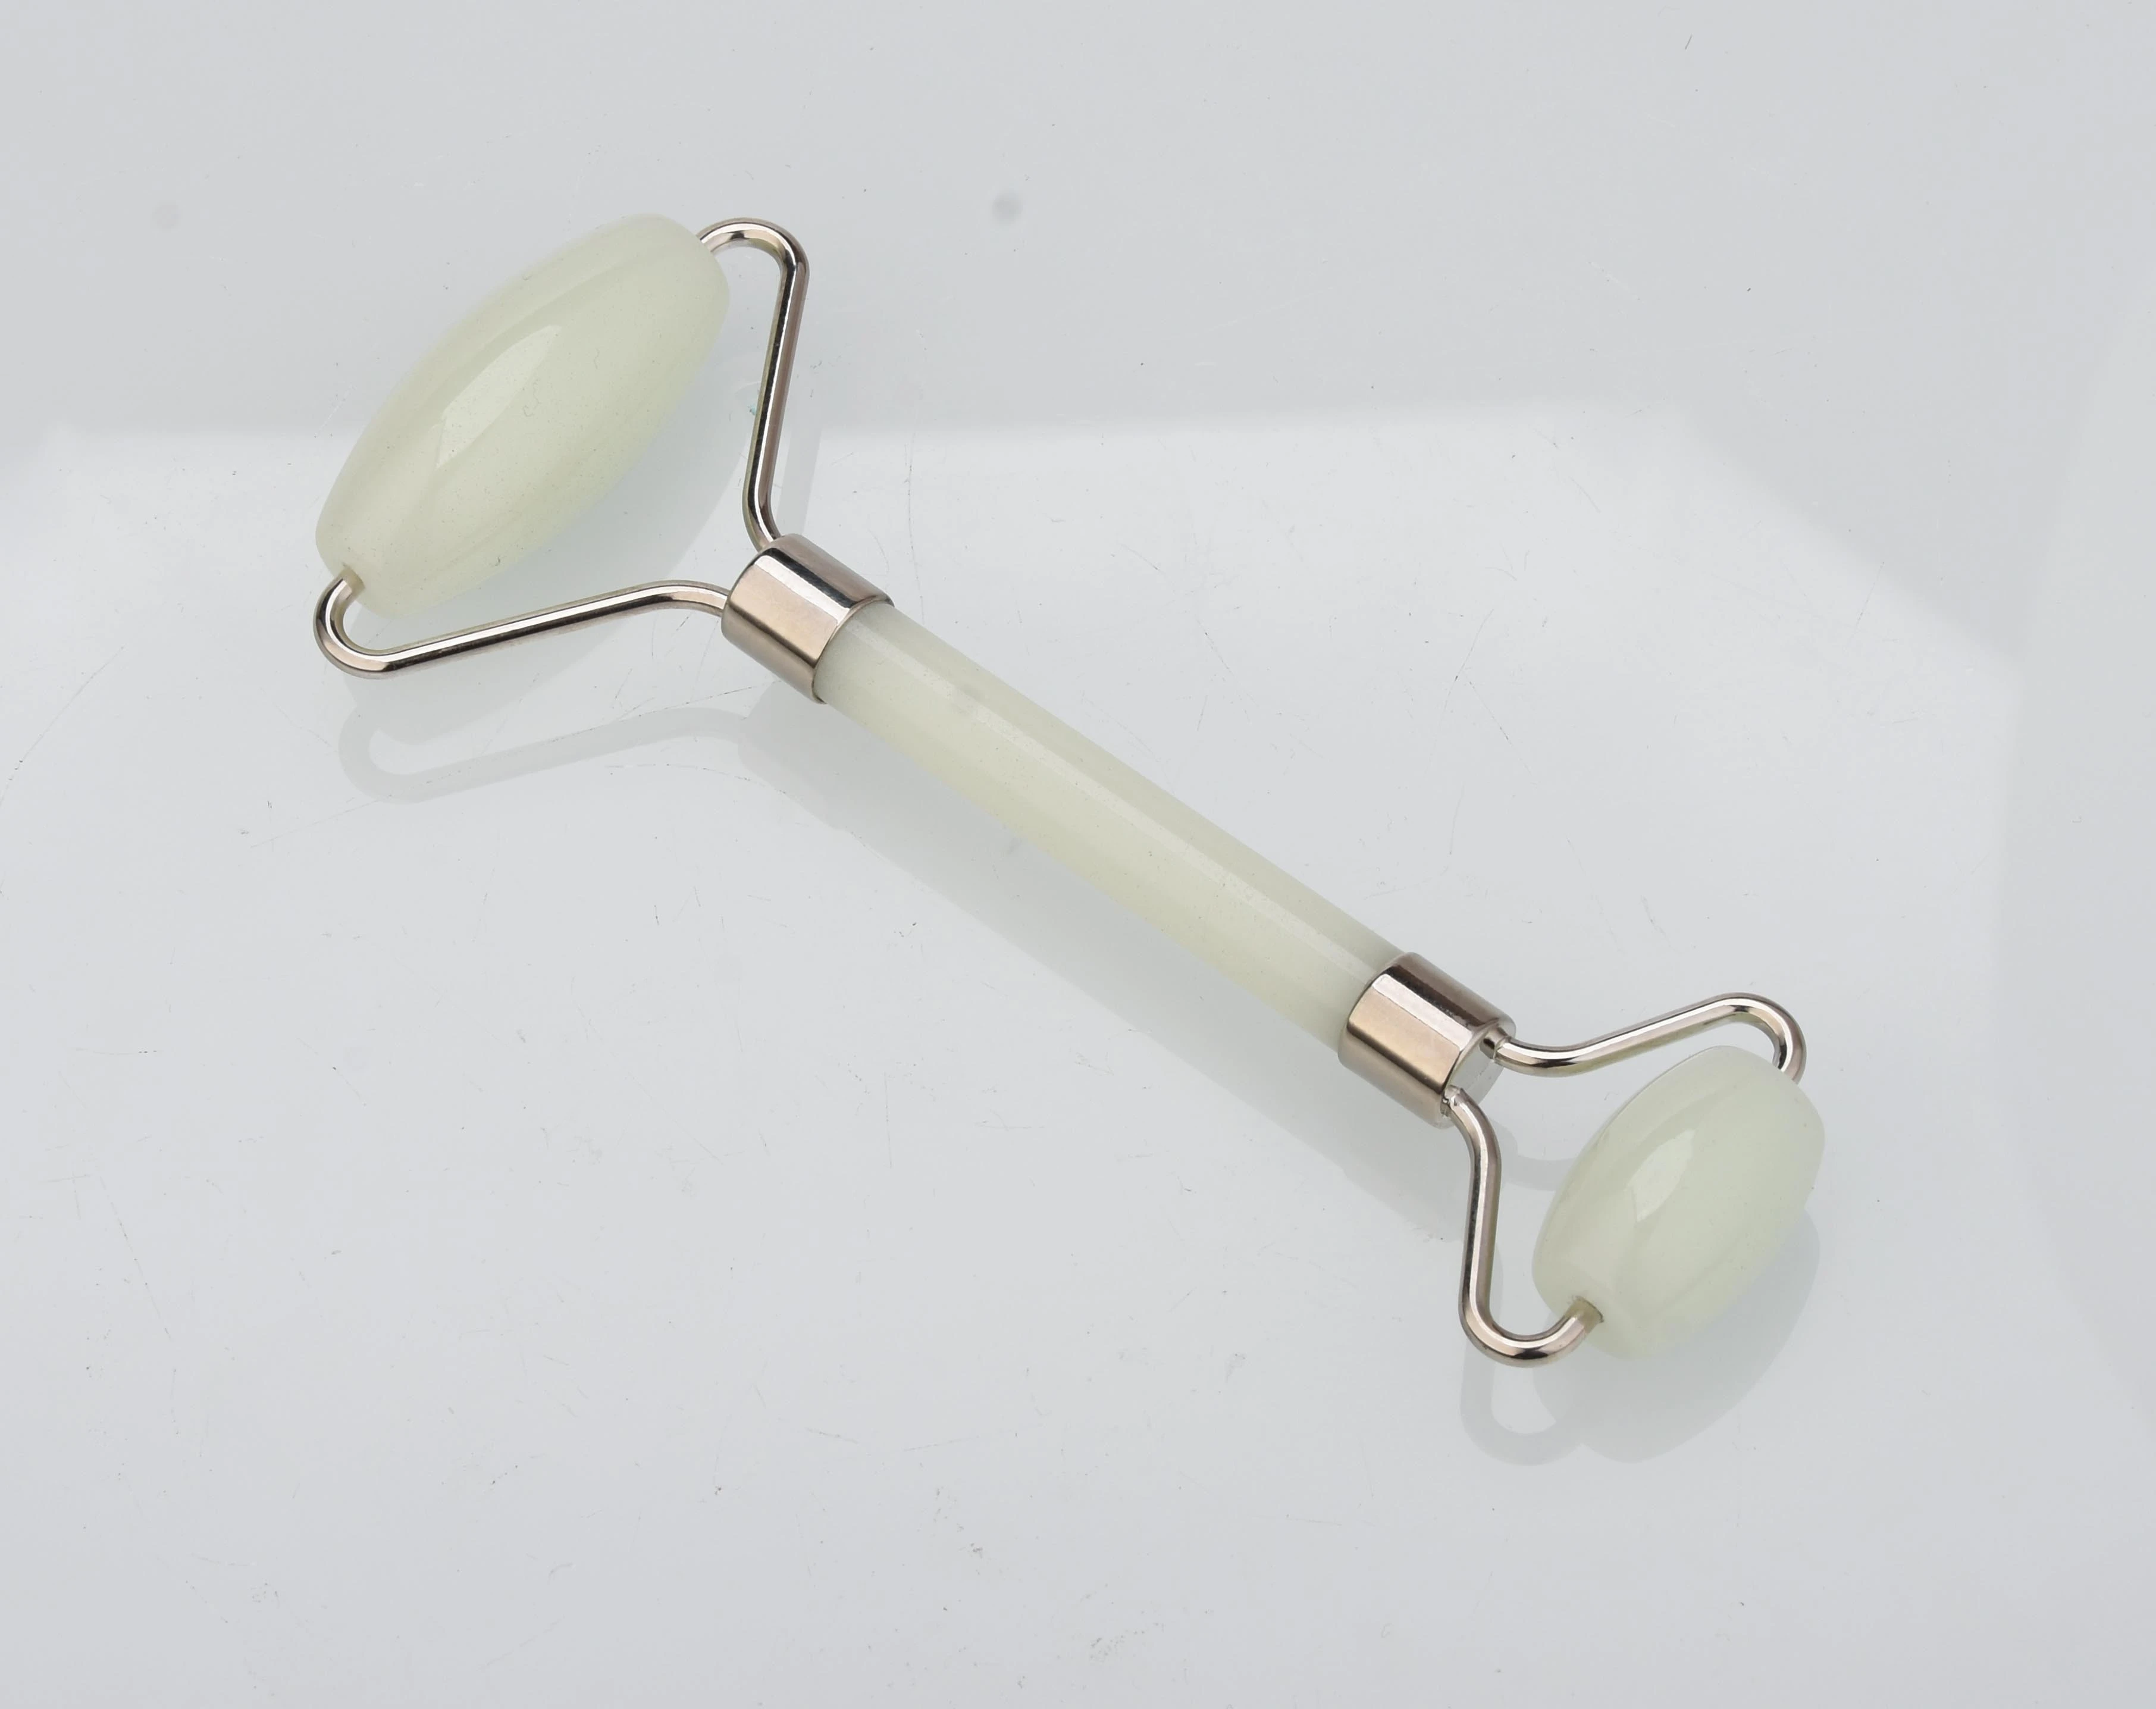 Hot Selling Anti-Aging Jade Roller And Gua Sha Set For Facial Eye Massage Roller Latest Improvements Noise Free Premium Quality